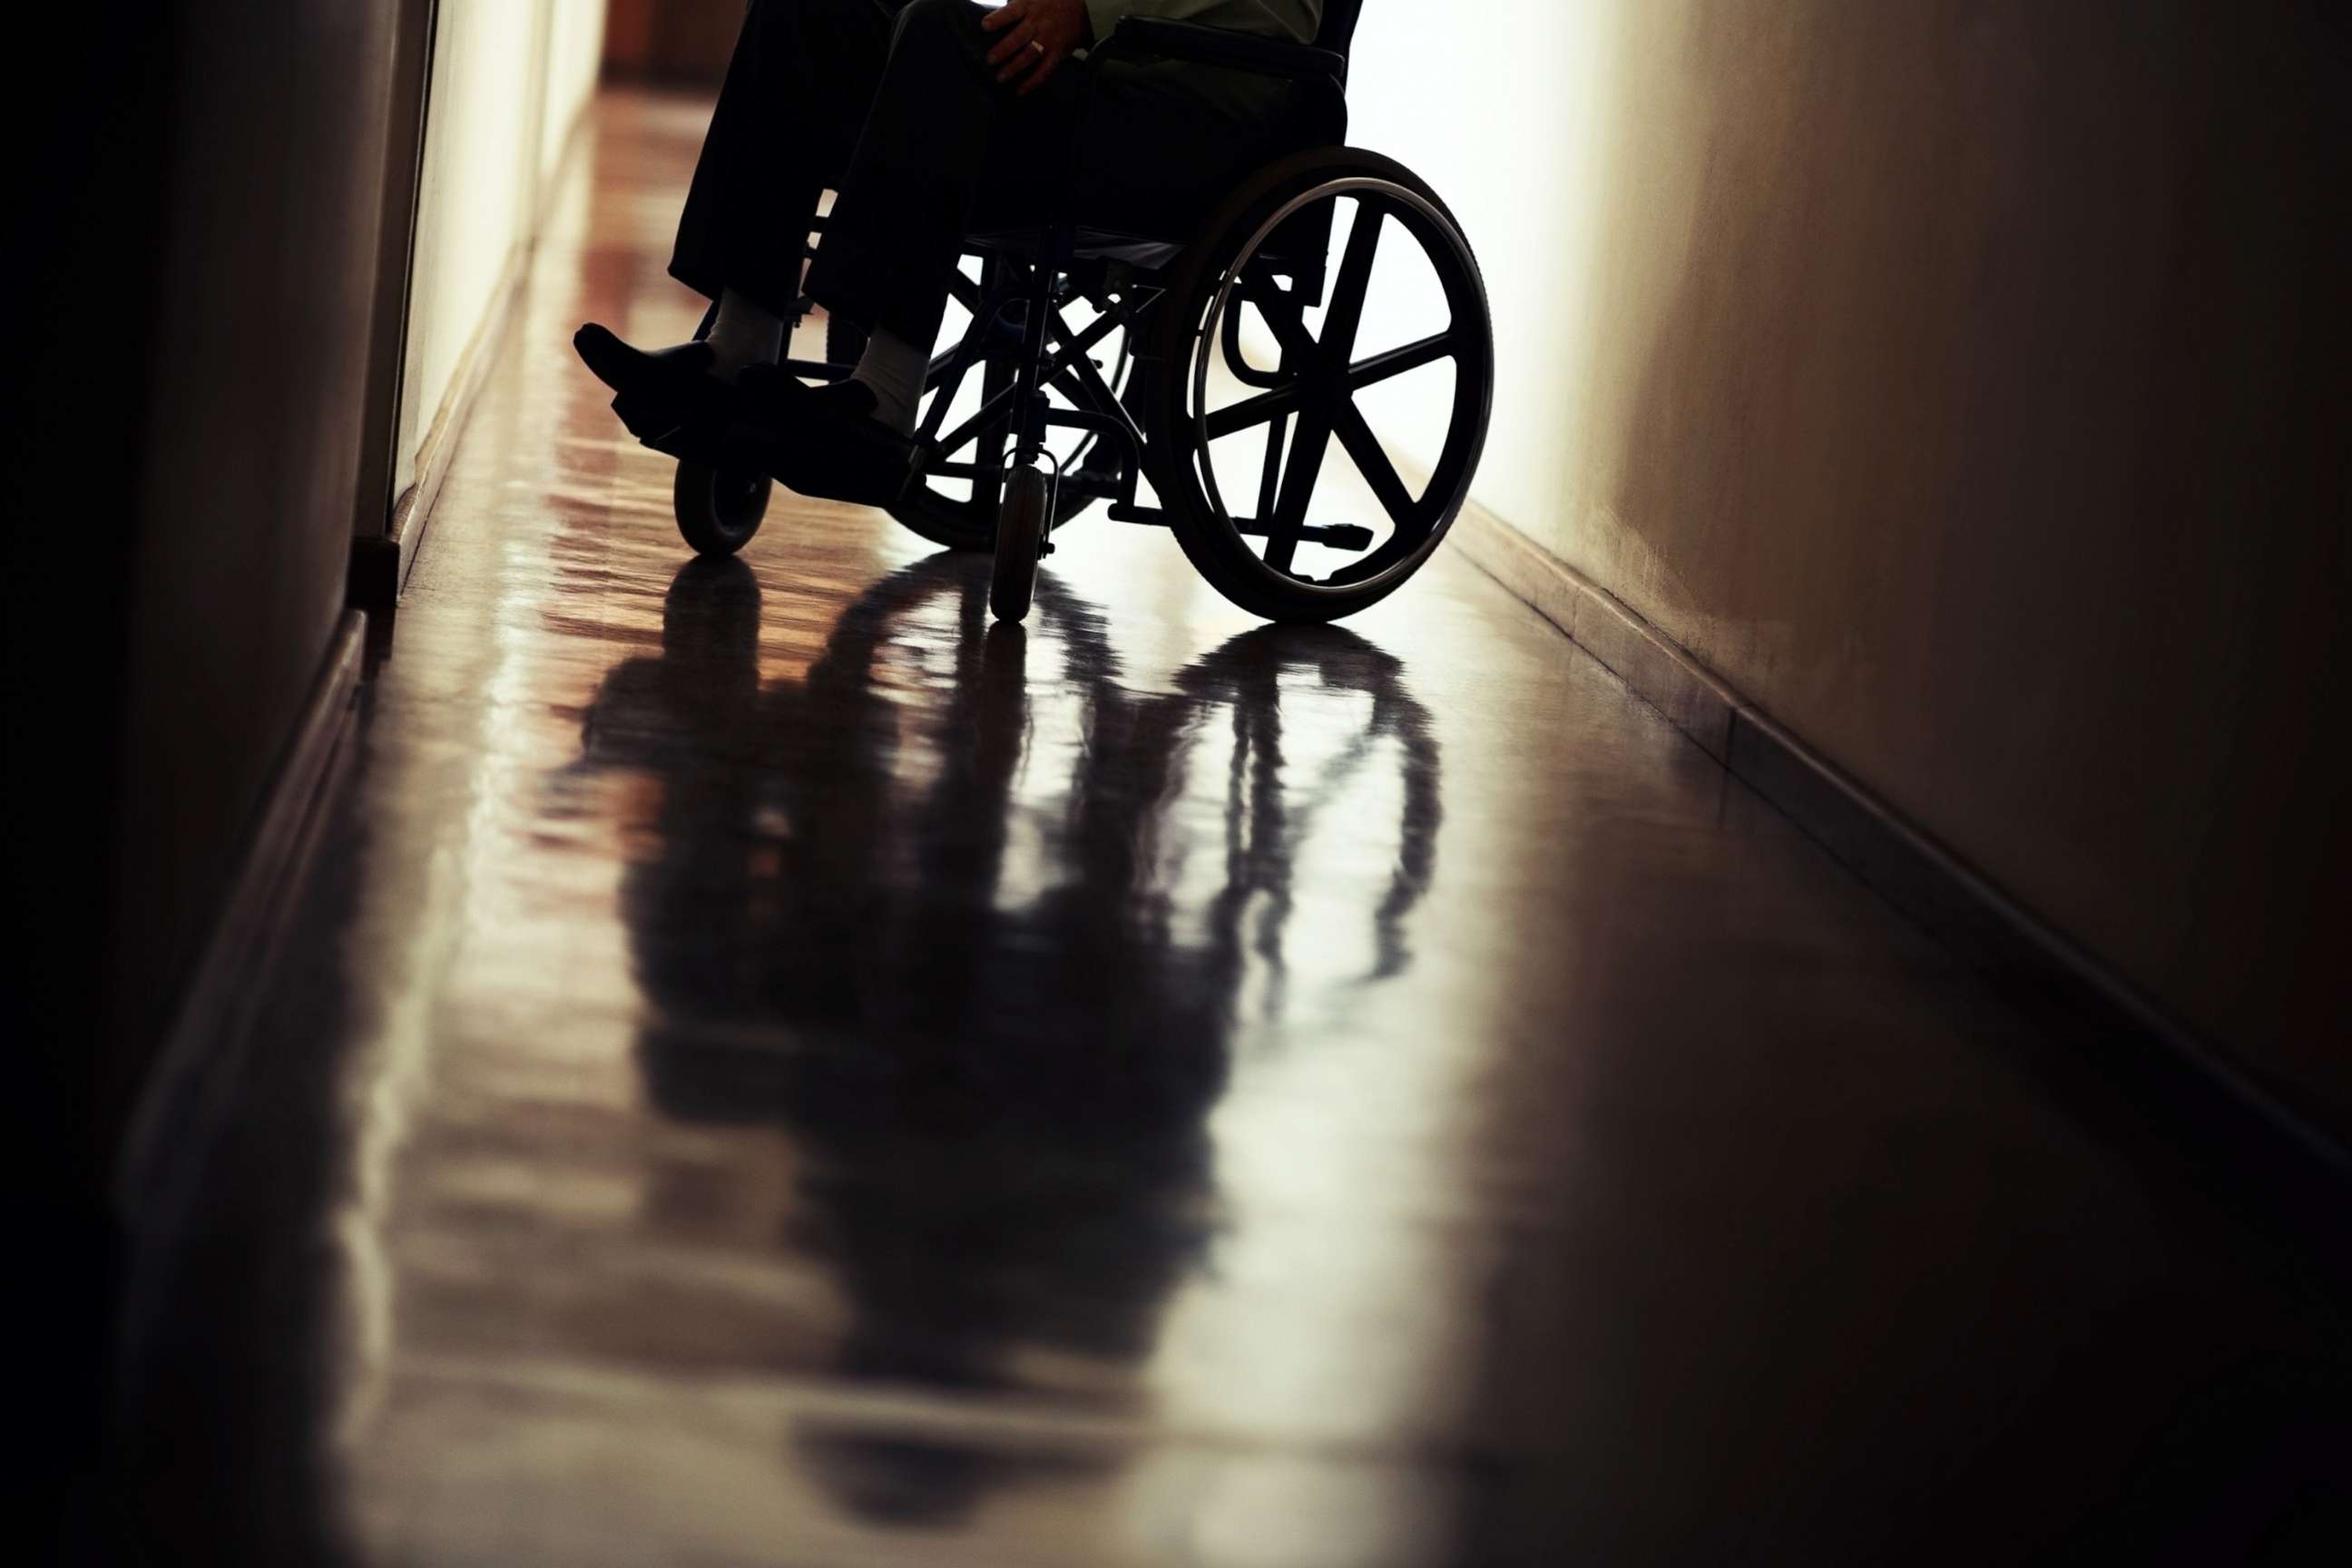 PHOTO: A disabled person sits in a wheelchair in an undated stock image.